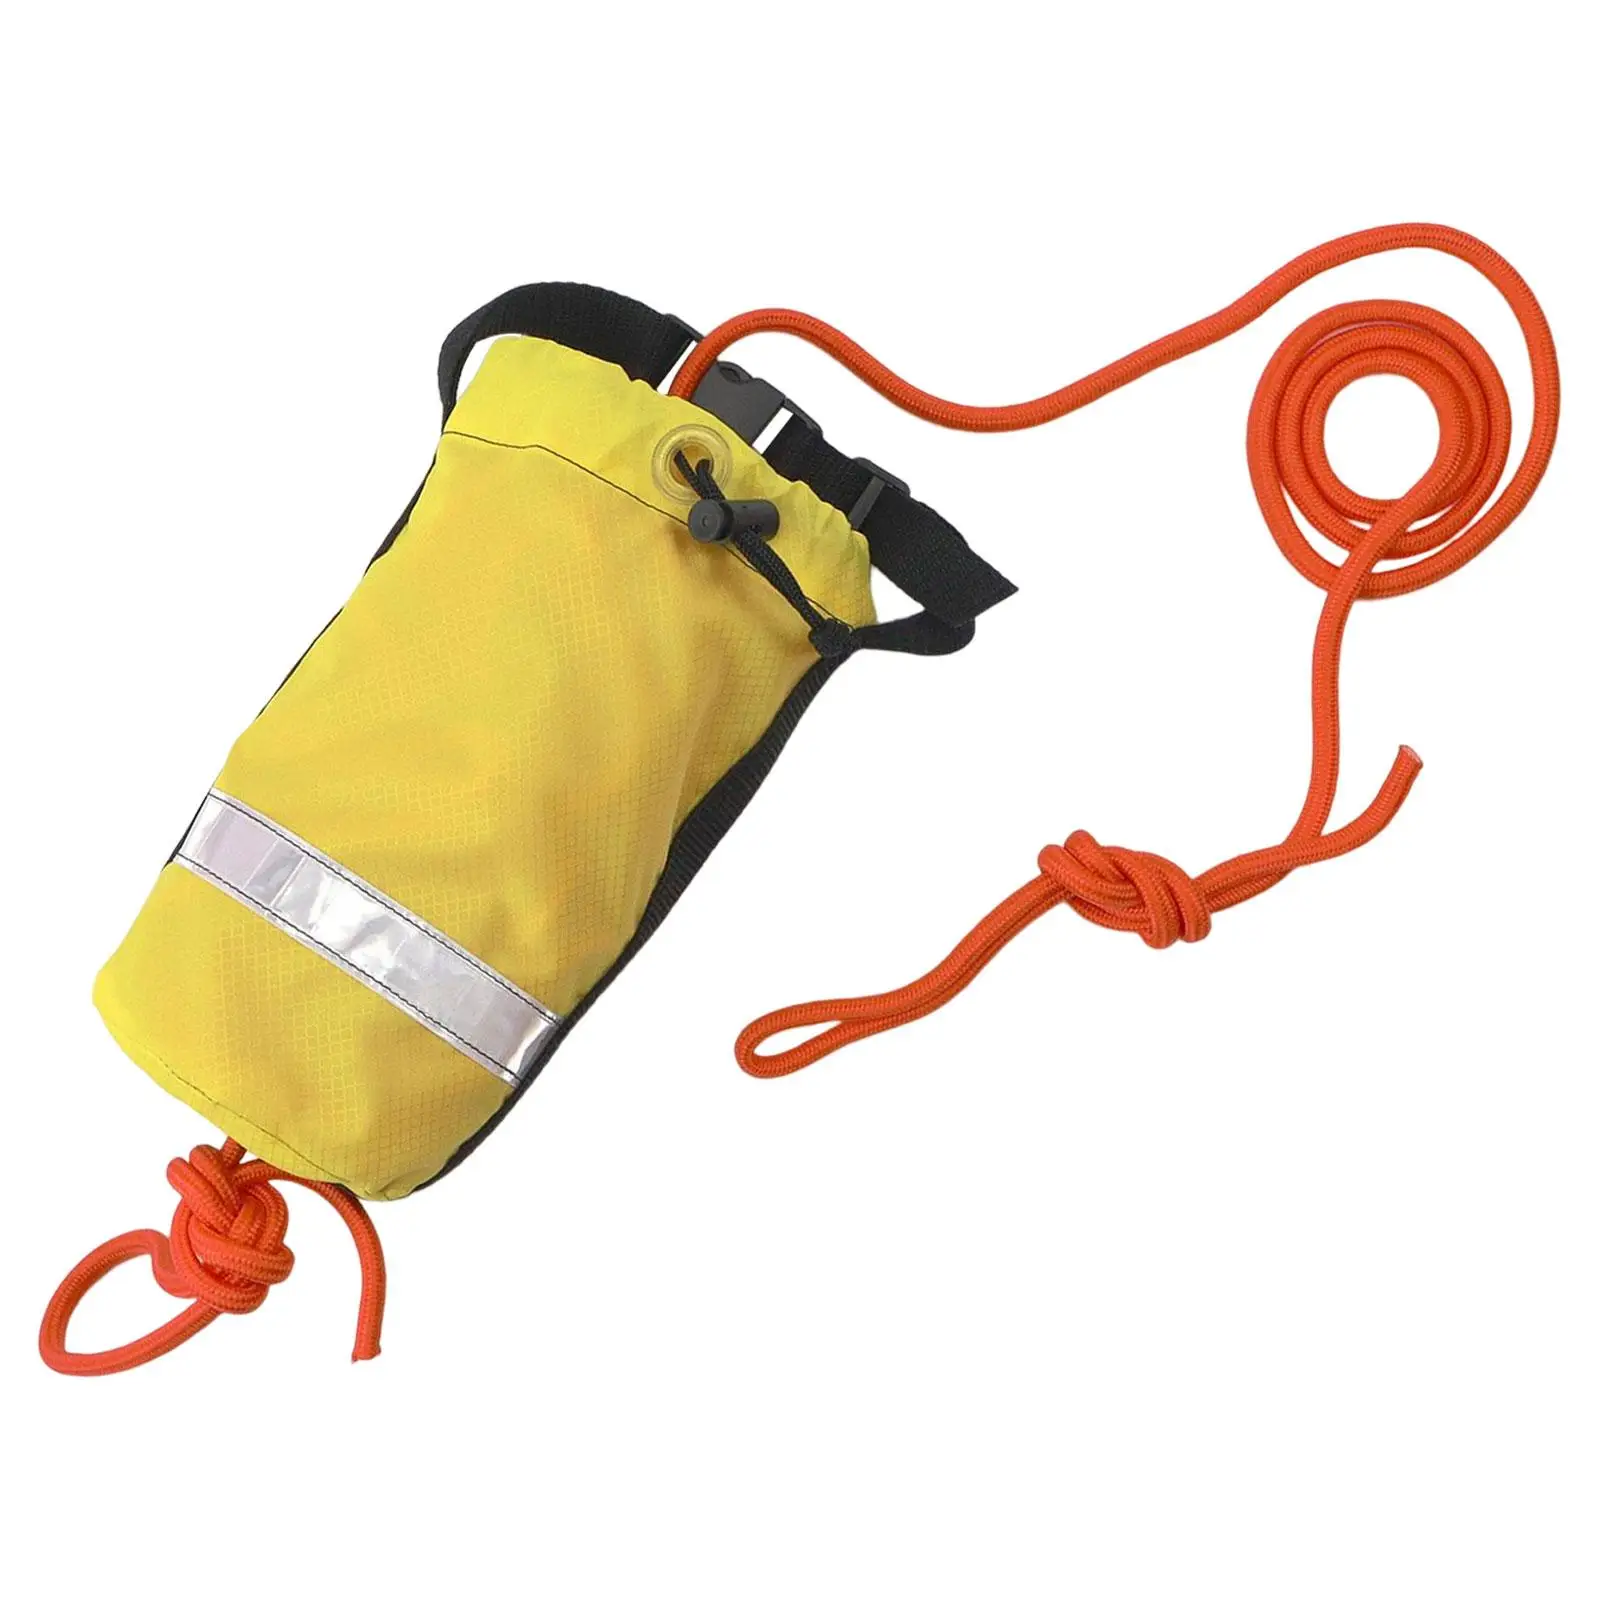 Rescue Throw Bag Flotation Device Floating Rope for Swimming Boating Safety Equipment